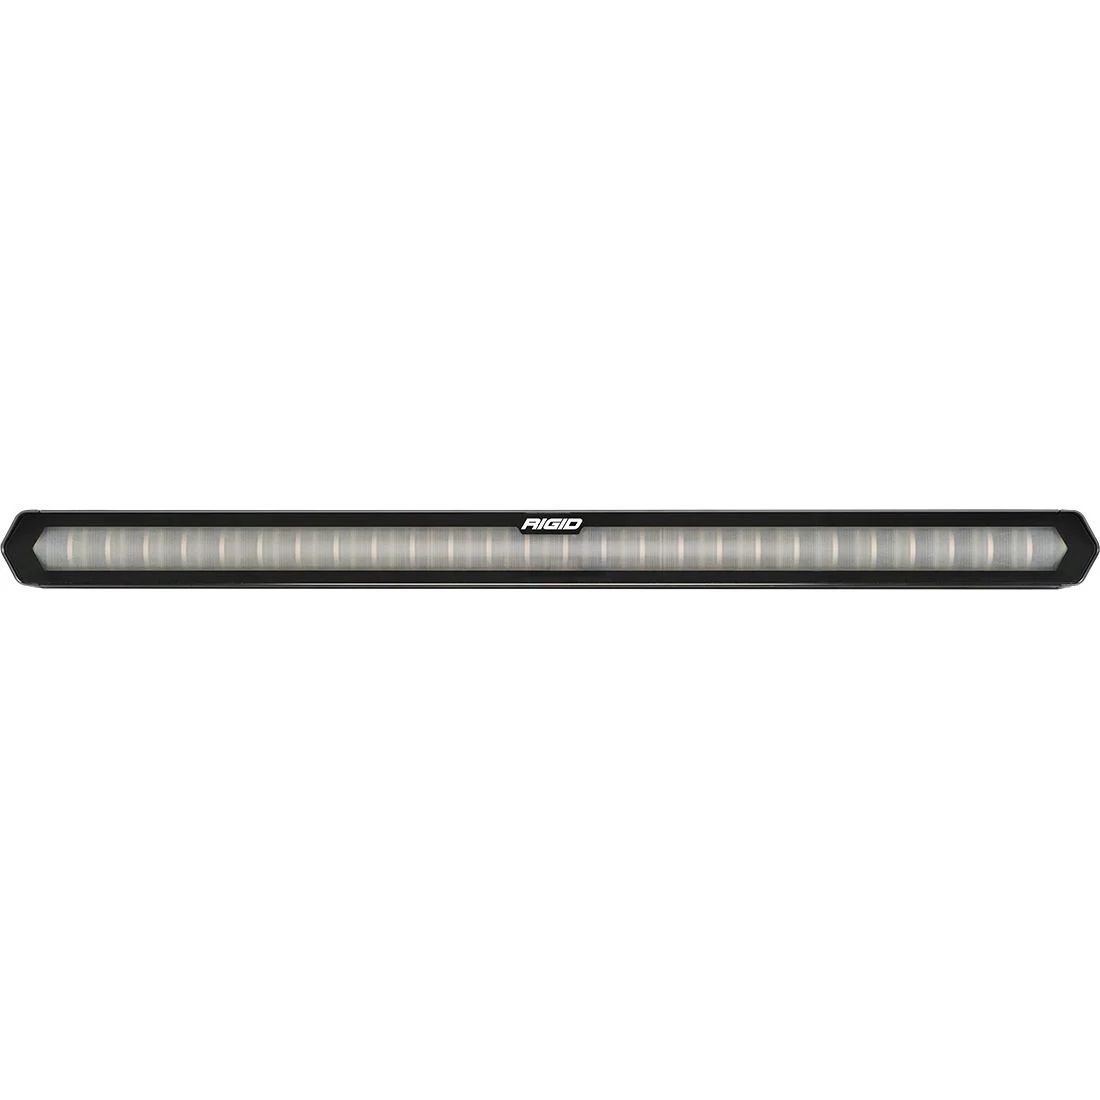 Rigid Industries - Rigid Industries 28 Inch LED Light Bar Rear Facing 27 Mode 5 Color Surface Mount Chase Series 901802